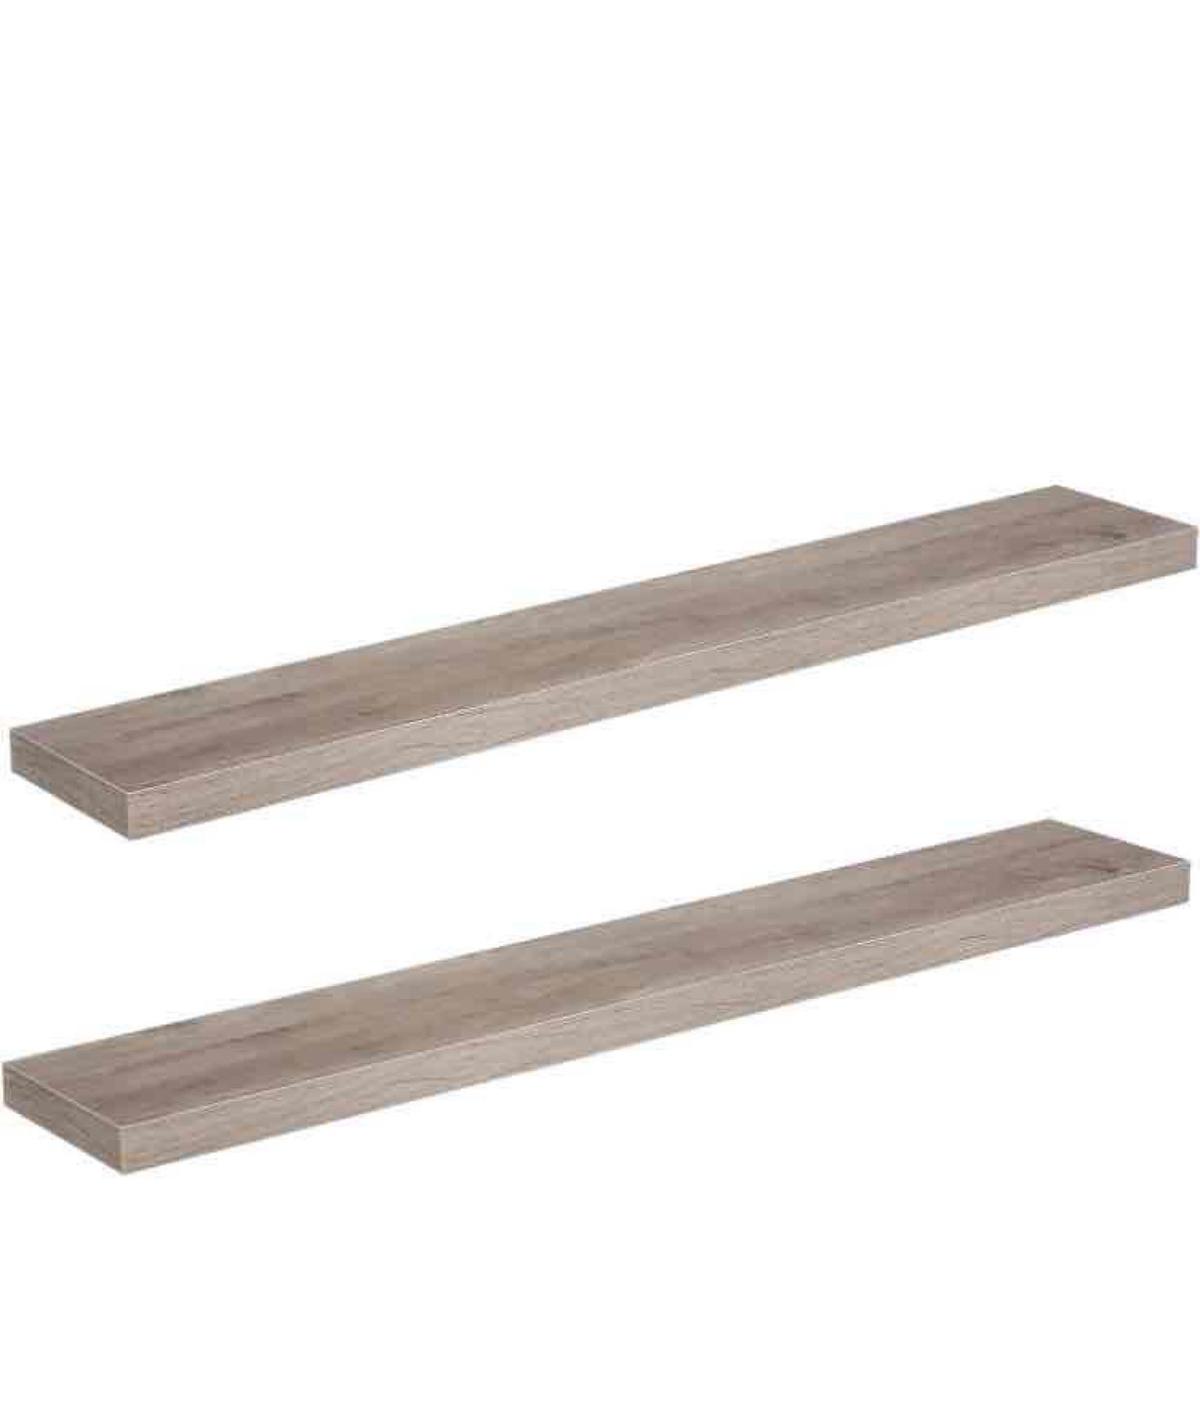 Floating Shelves, Wall Shelf Set of 2, 47.2 Inch Hanging Shelves with Invisible Brackets, for